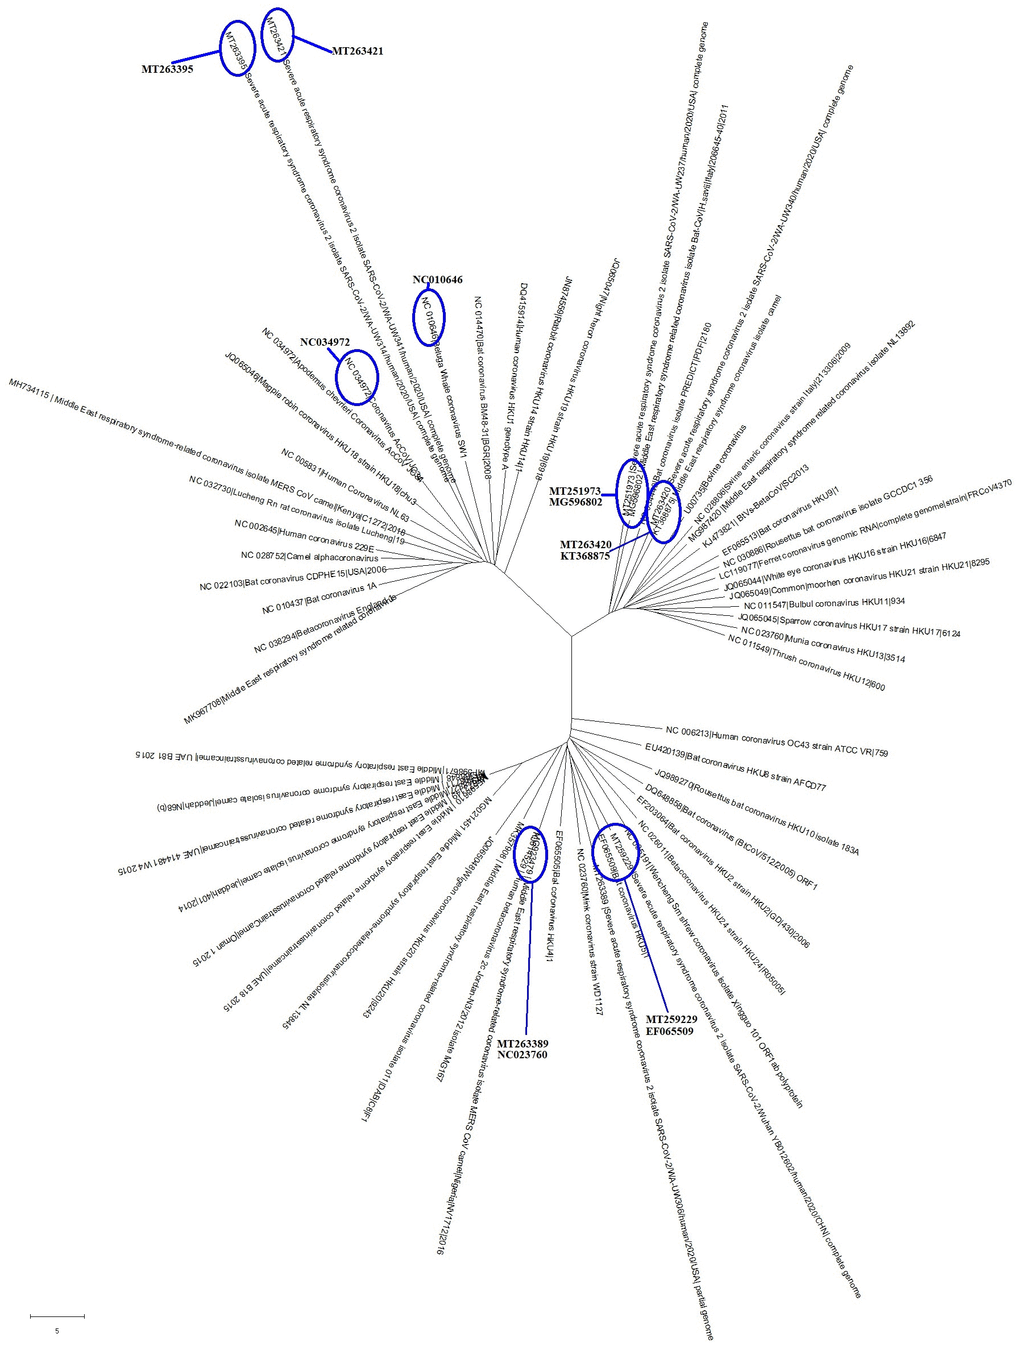 The evolutionary tree of common coronaviruses that infect other organisms and their phylogenetic comparisons with SARS-CoV-2. These common coronavirus strains could be grouped into 3 clades, with 6 of the coronavirus strains being particularly close to the SARS-CoV-2 in evolution.